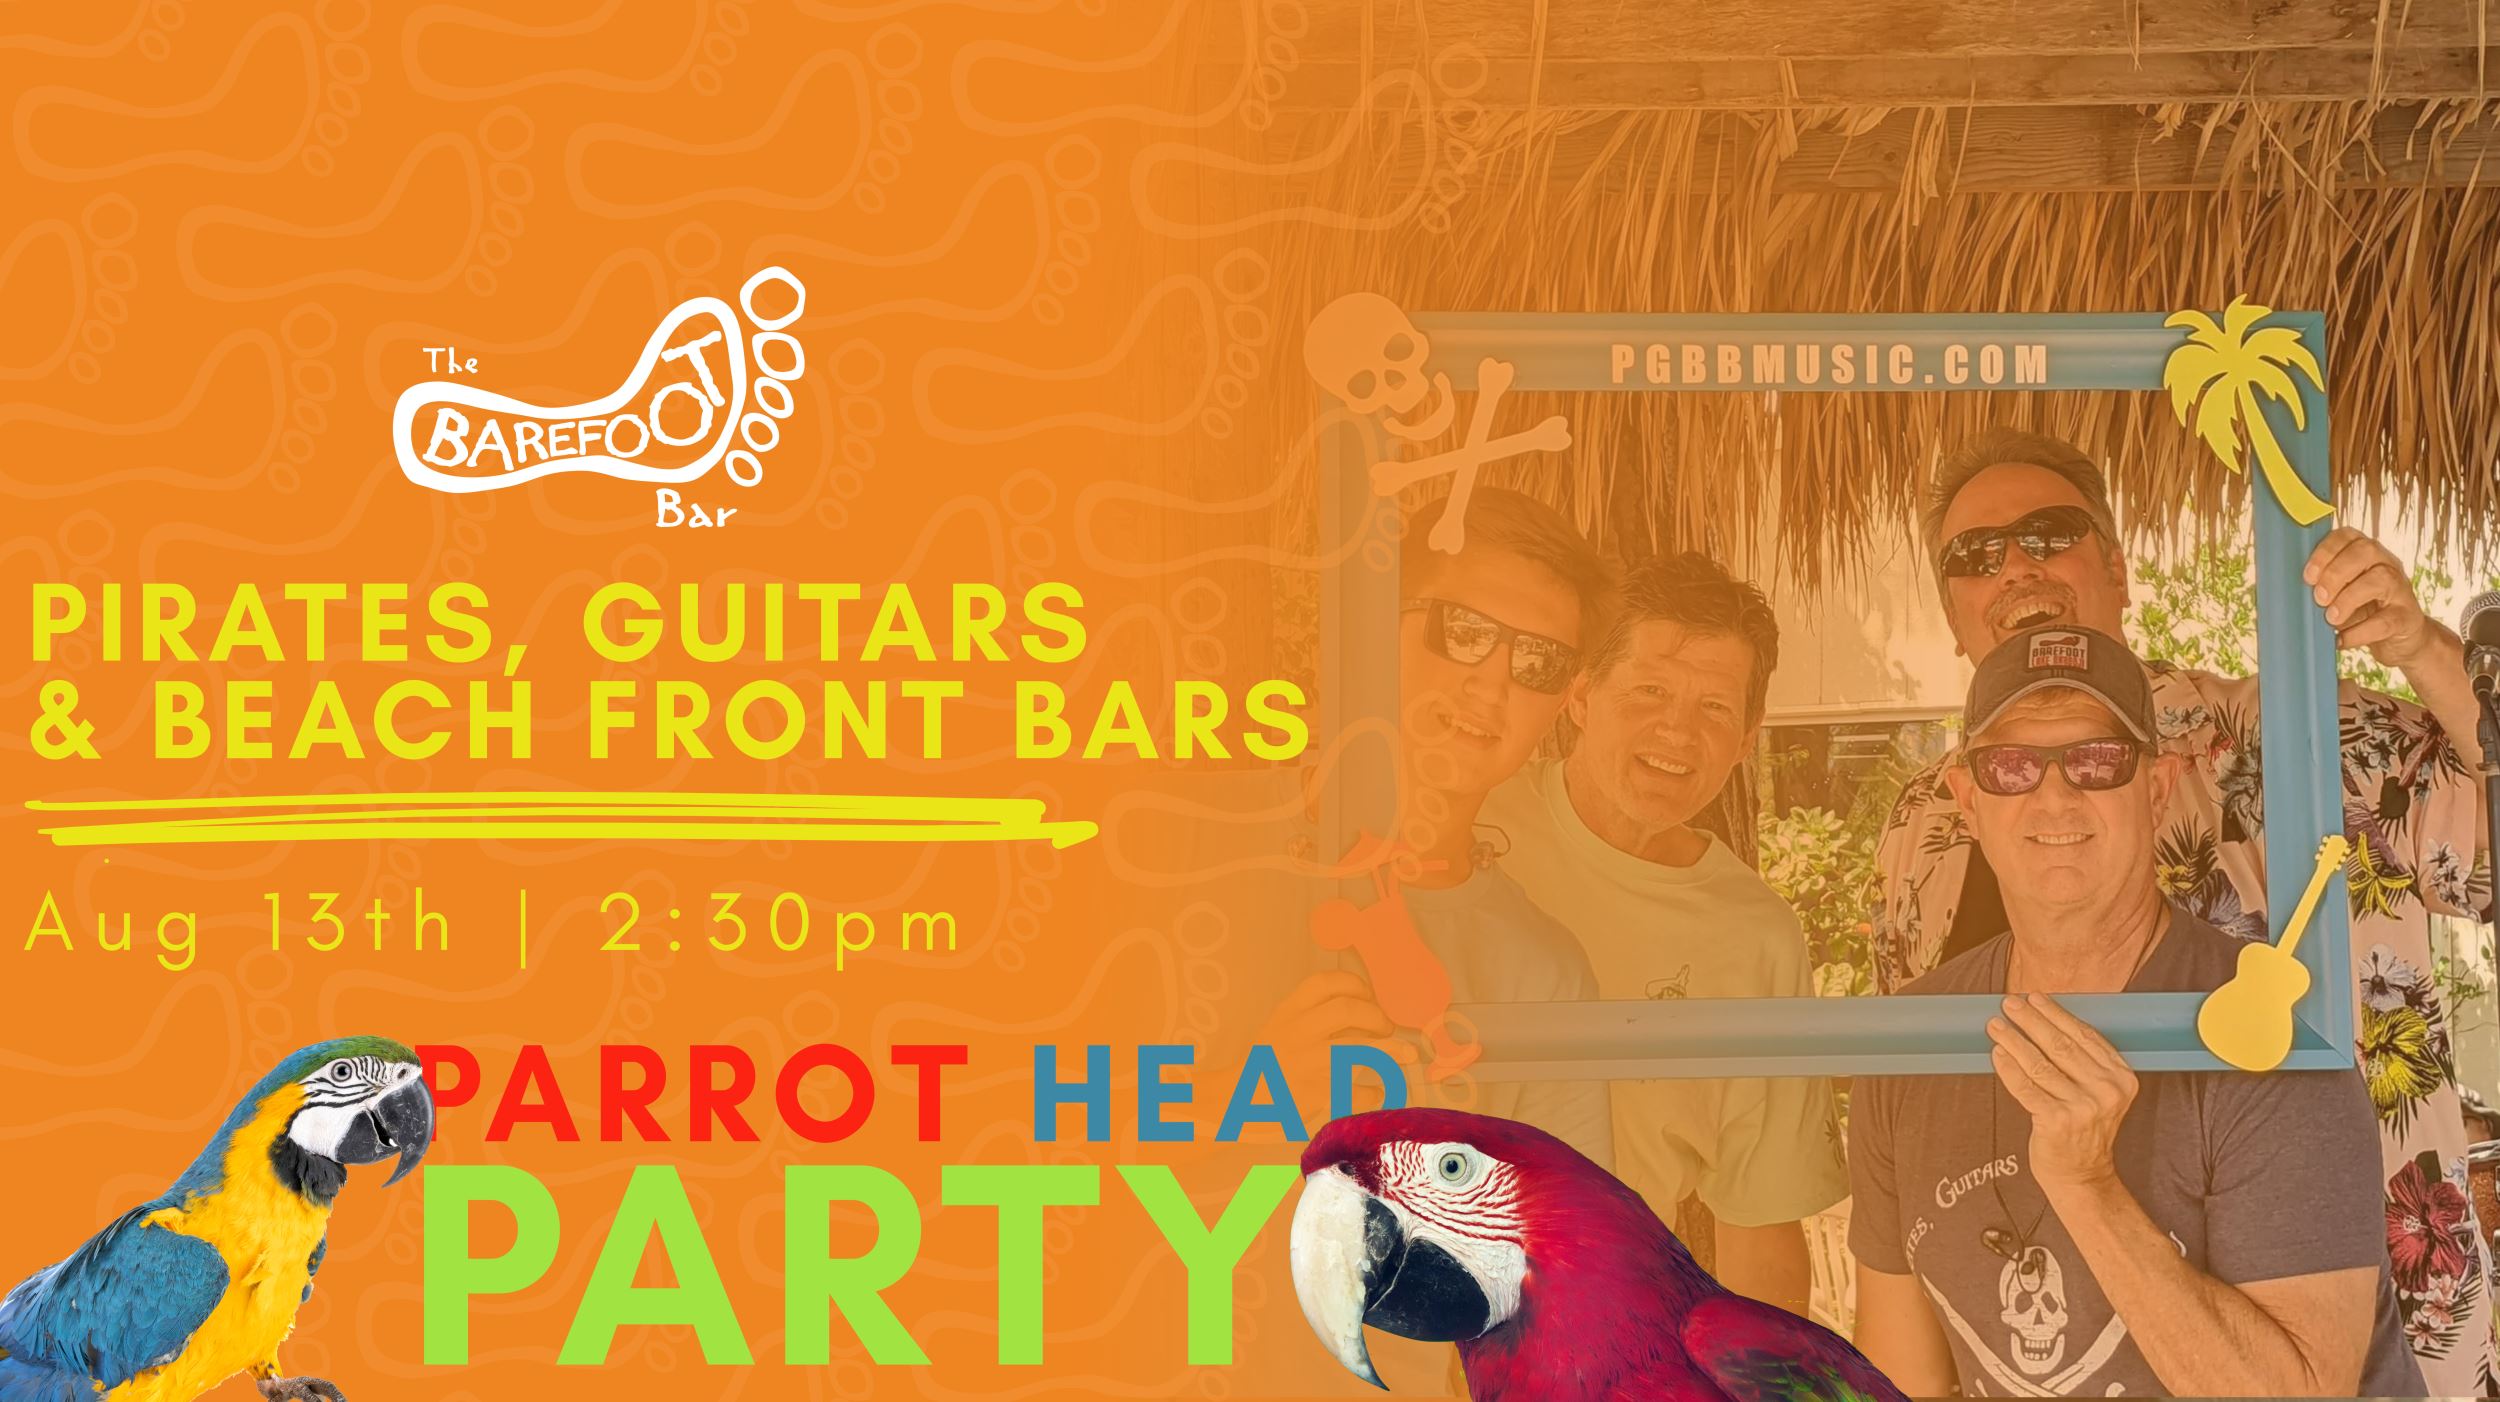 Parrot Head Party with Pirates, Guitars and Beach Front Bars